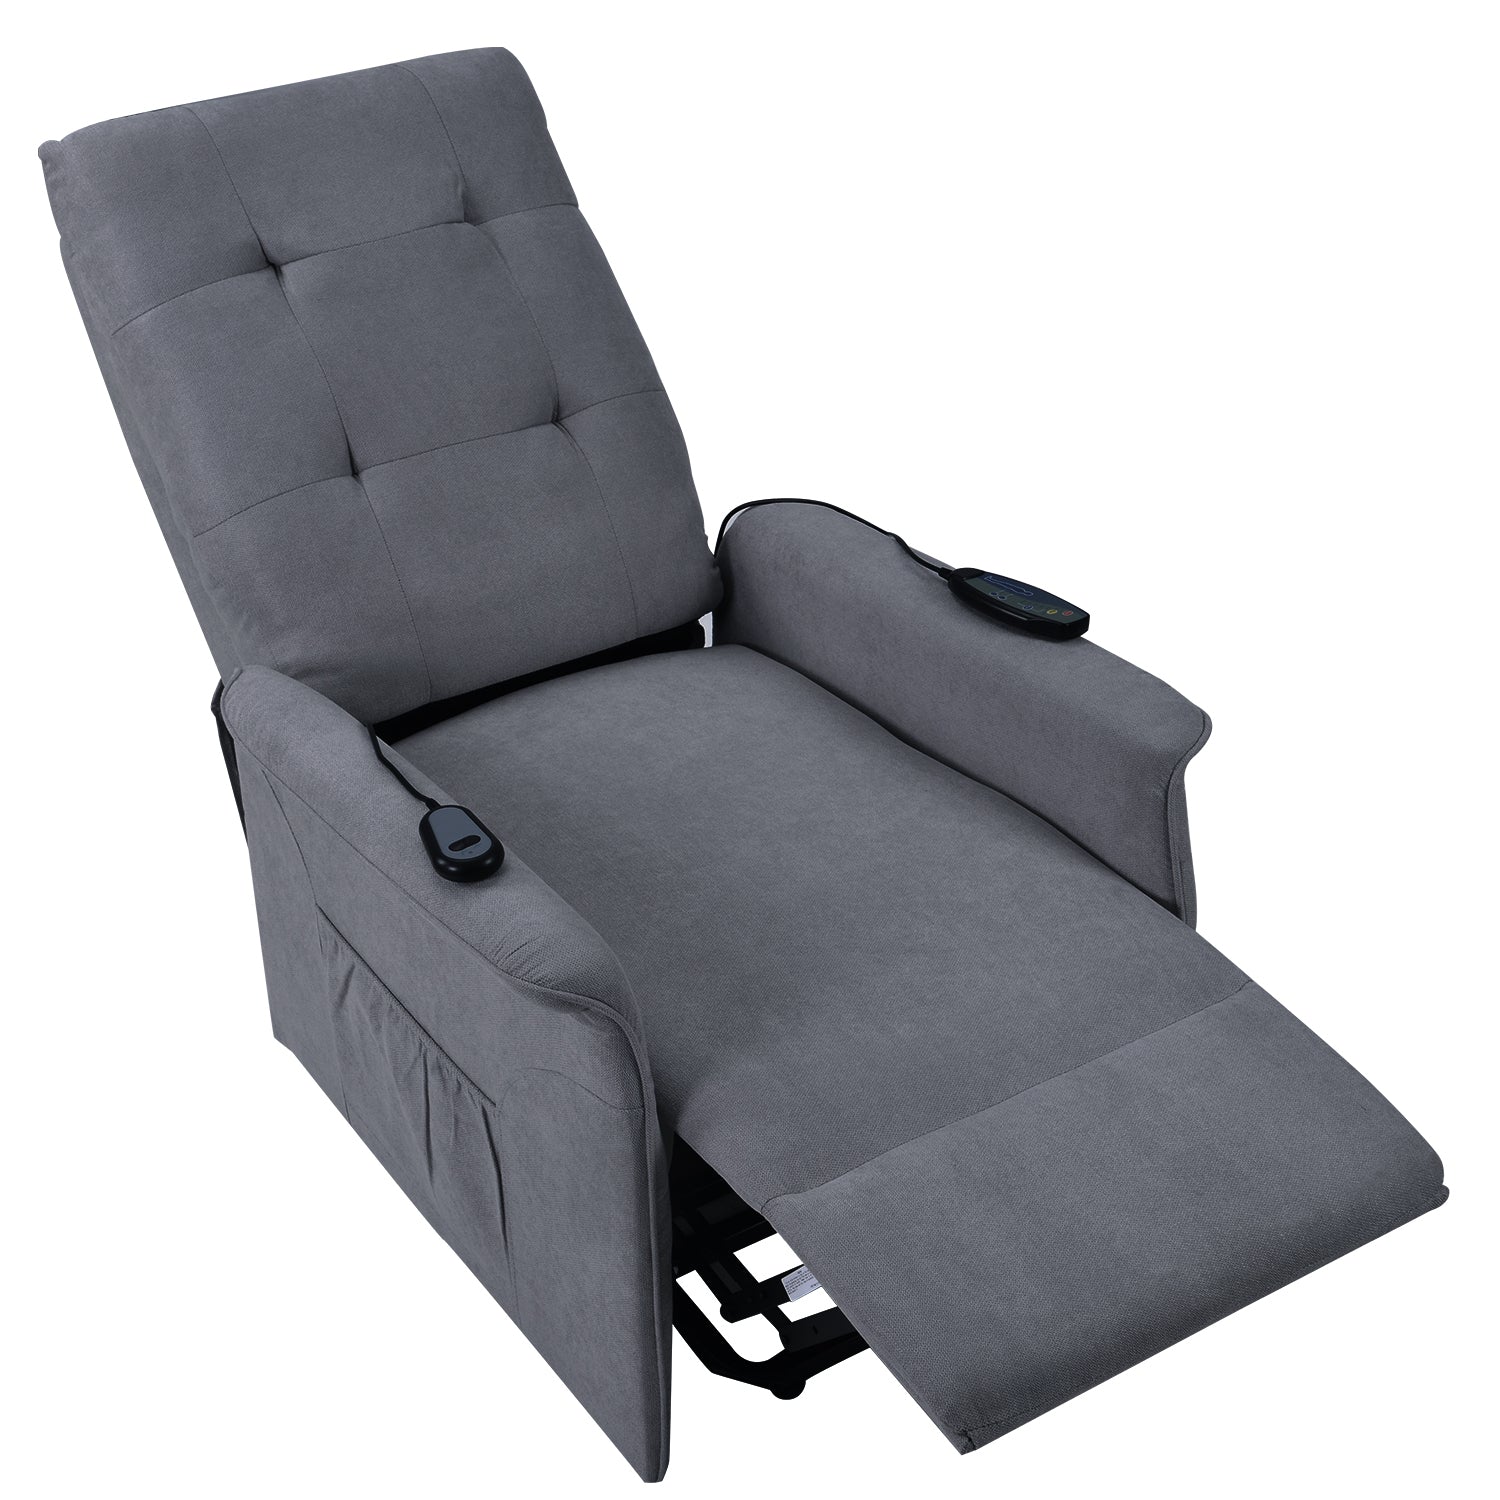 Power Lift Chair Recliner with Adjustable Massage, Dark Gray reclined